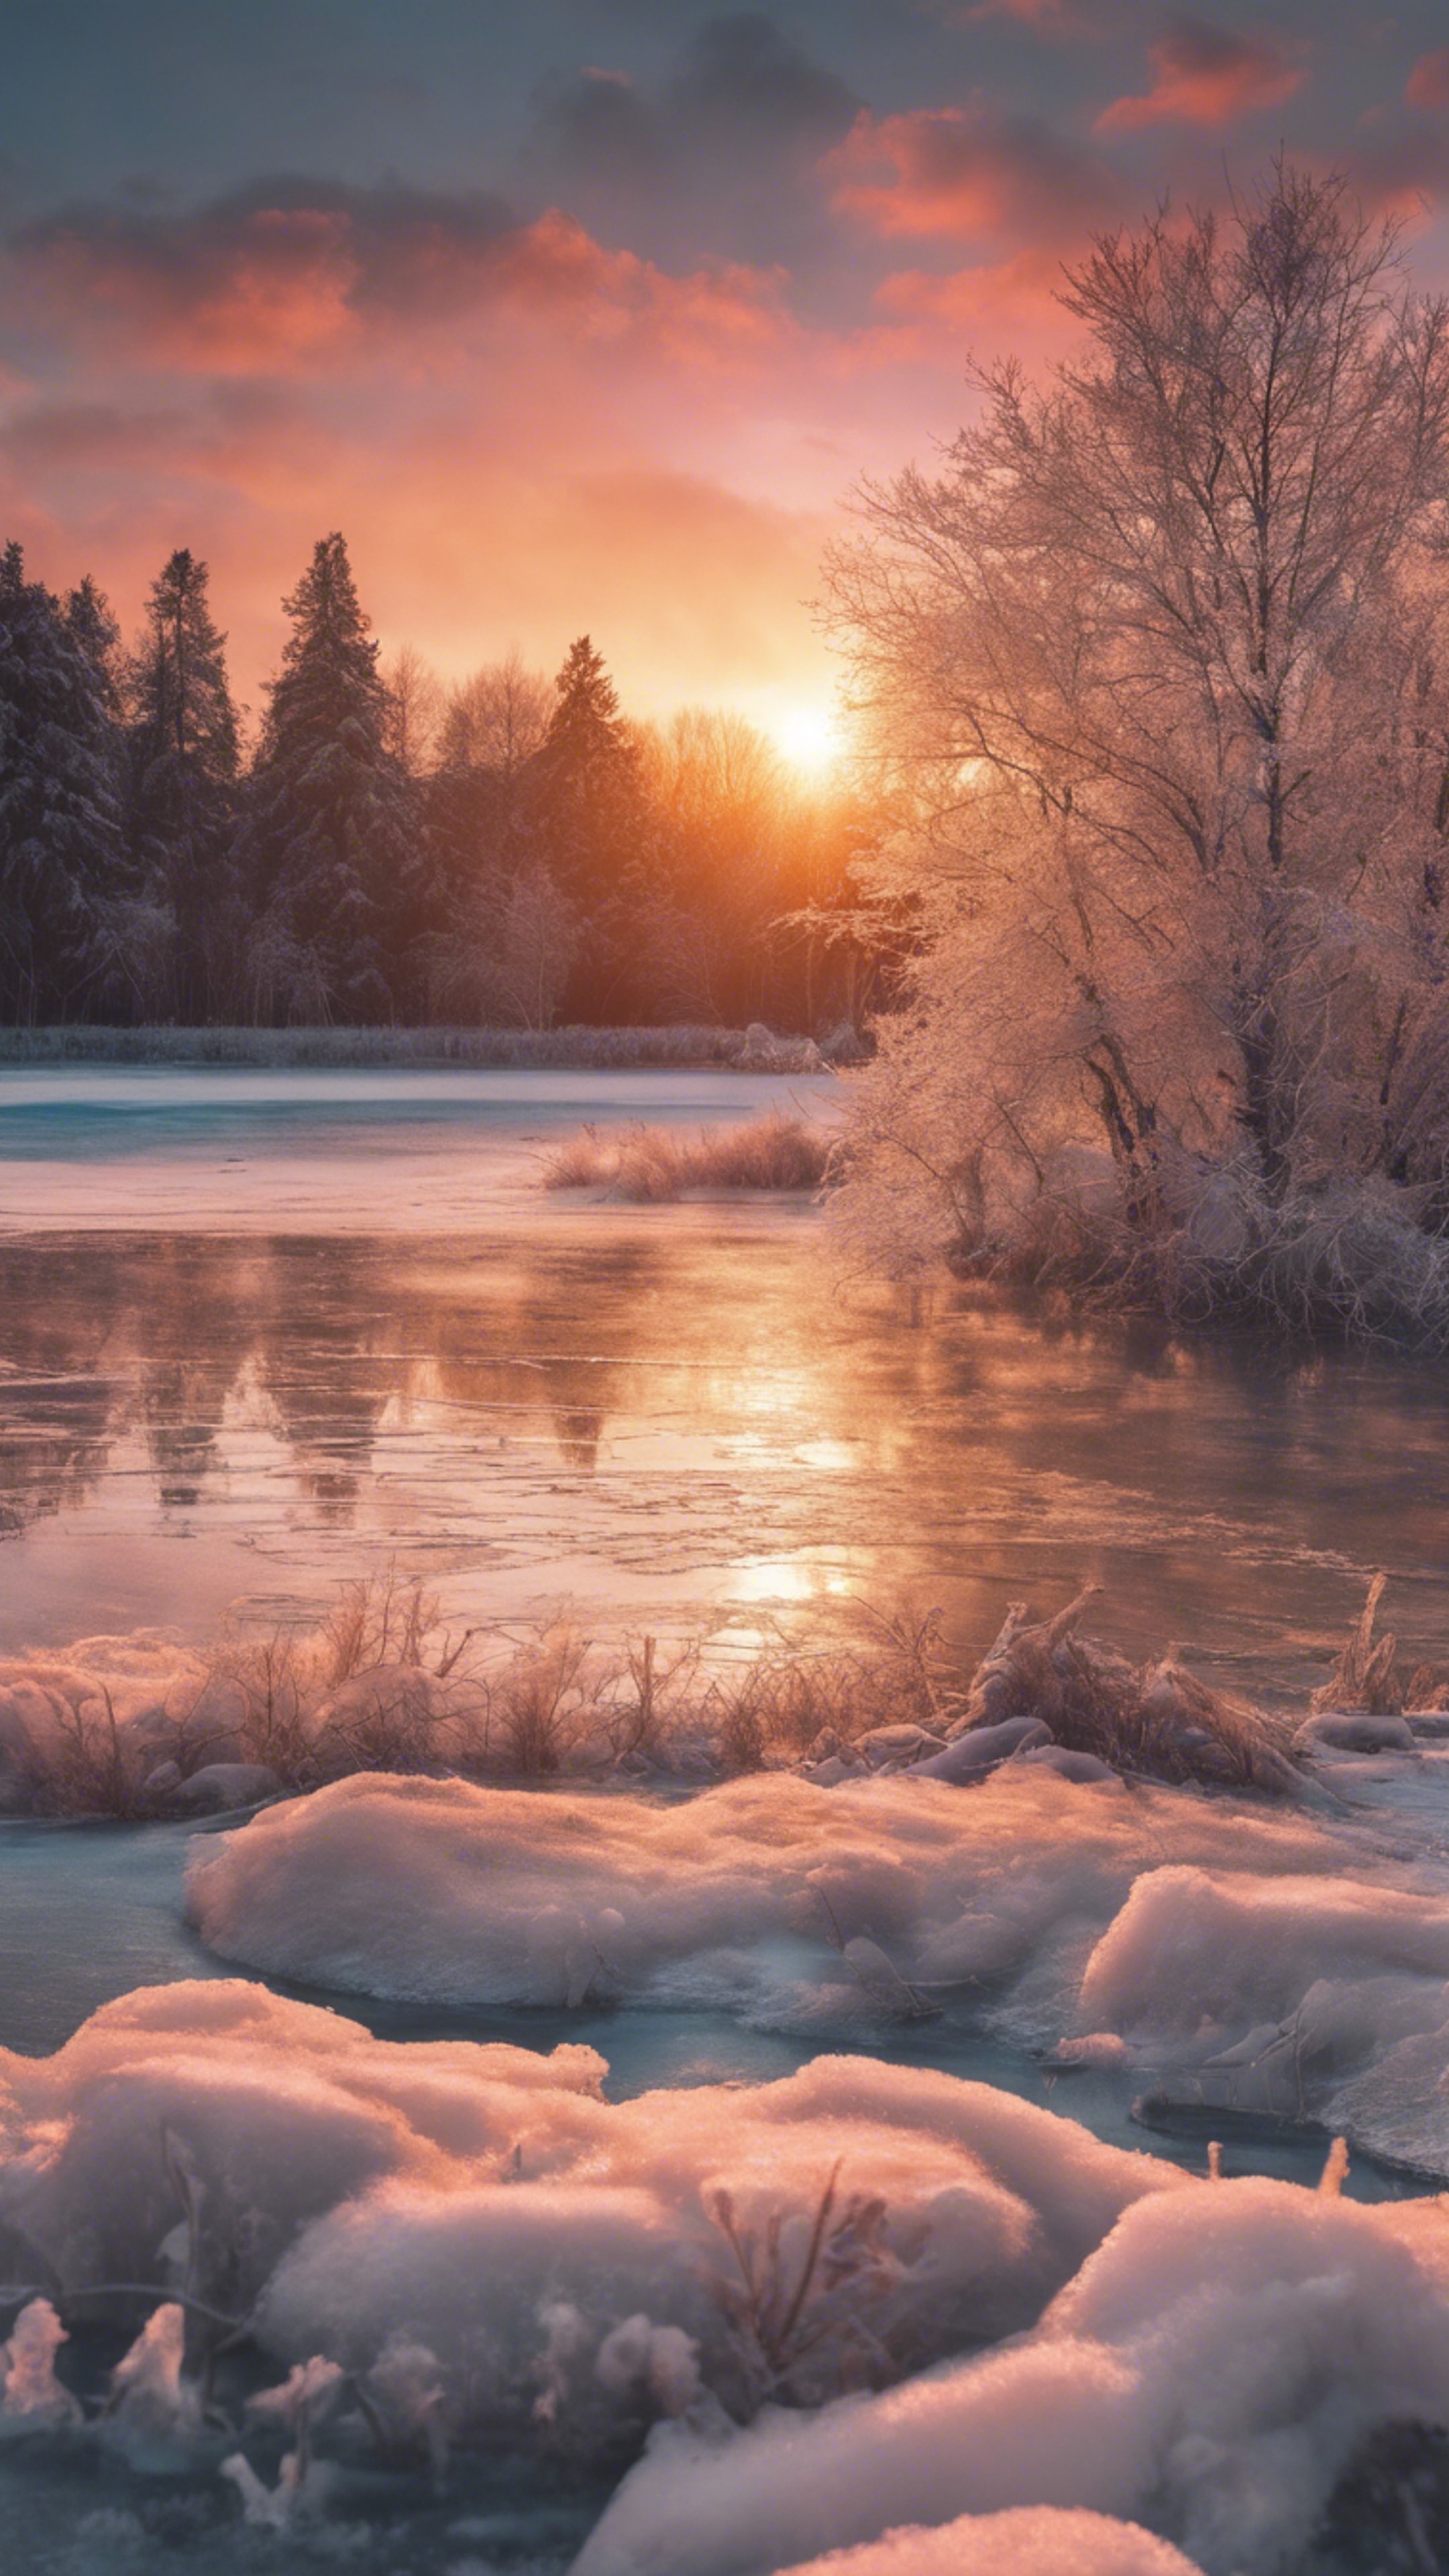 A vivid sunset over a frozen lake, turning the whole winter scene into a painter's palette. Wallpaper[cb553564e40840eb96b7]